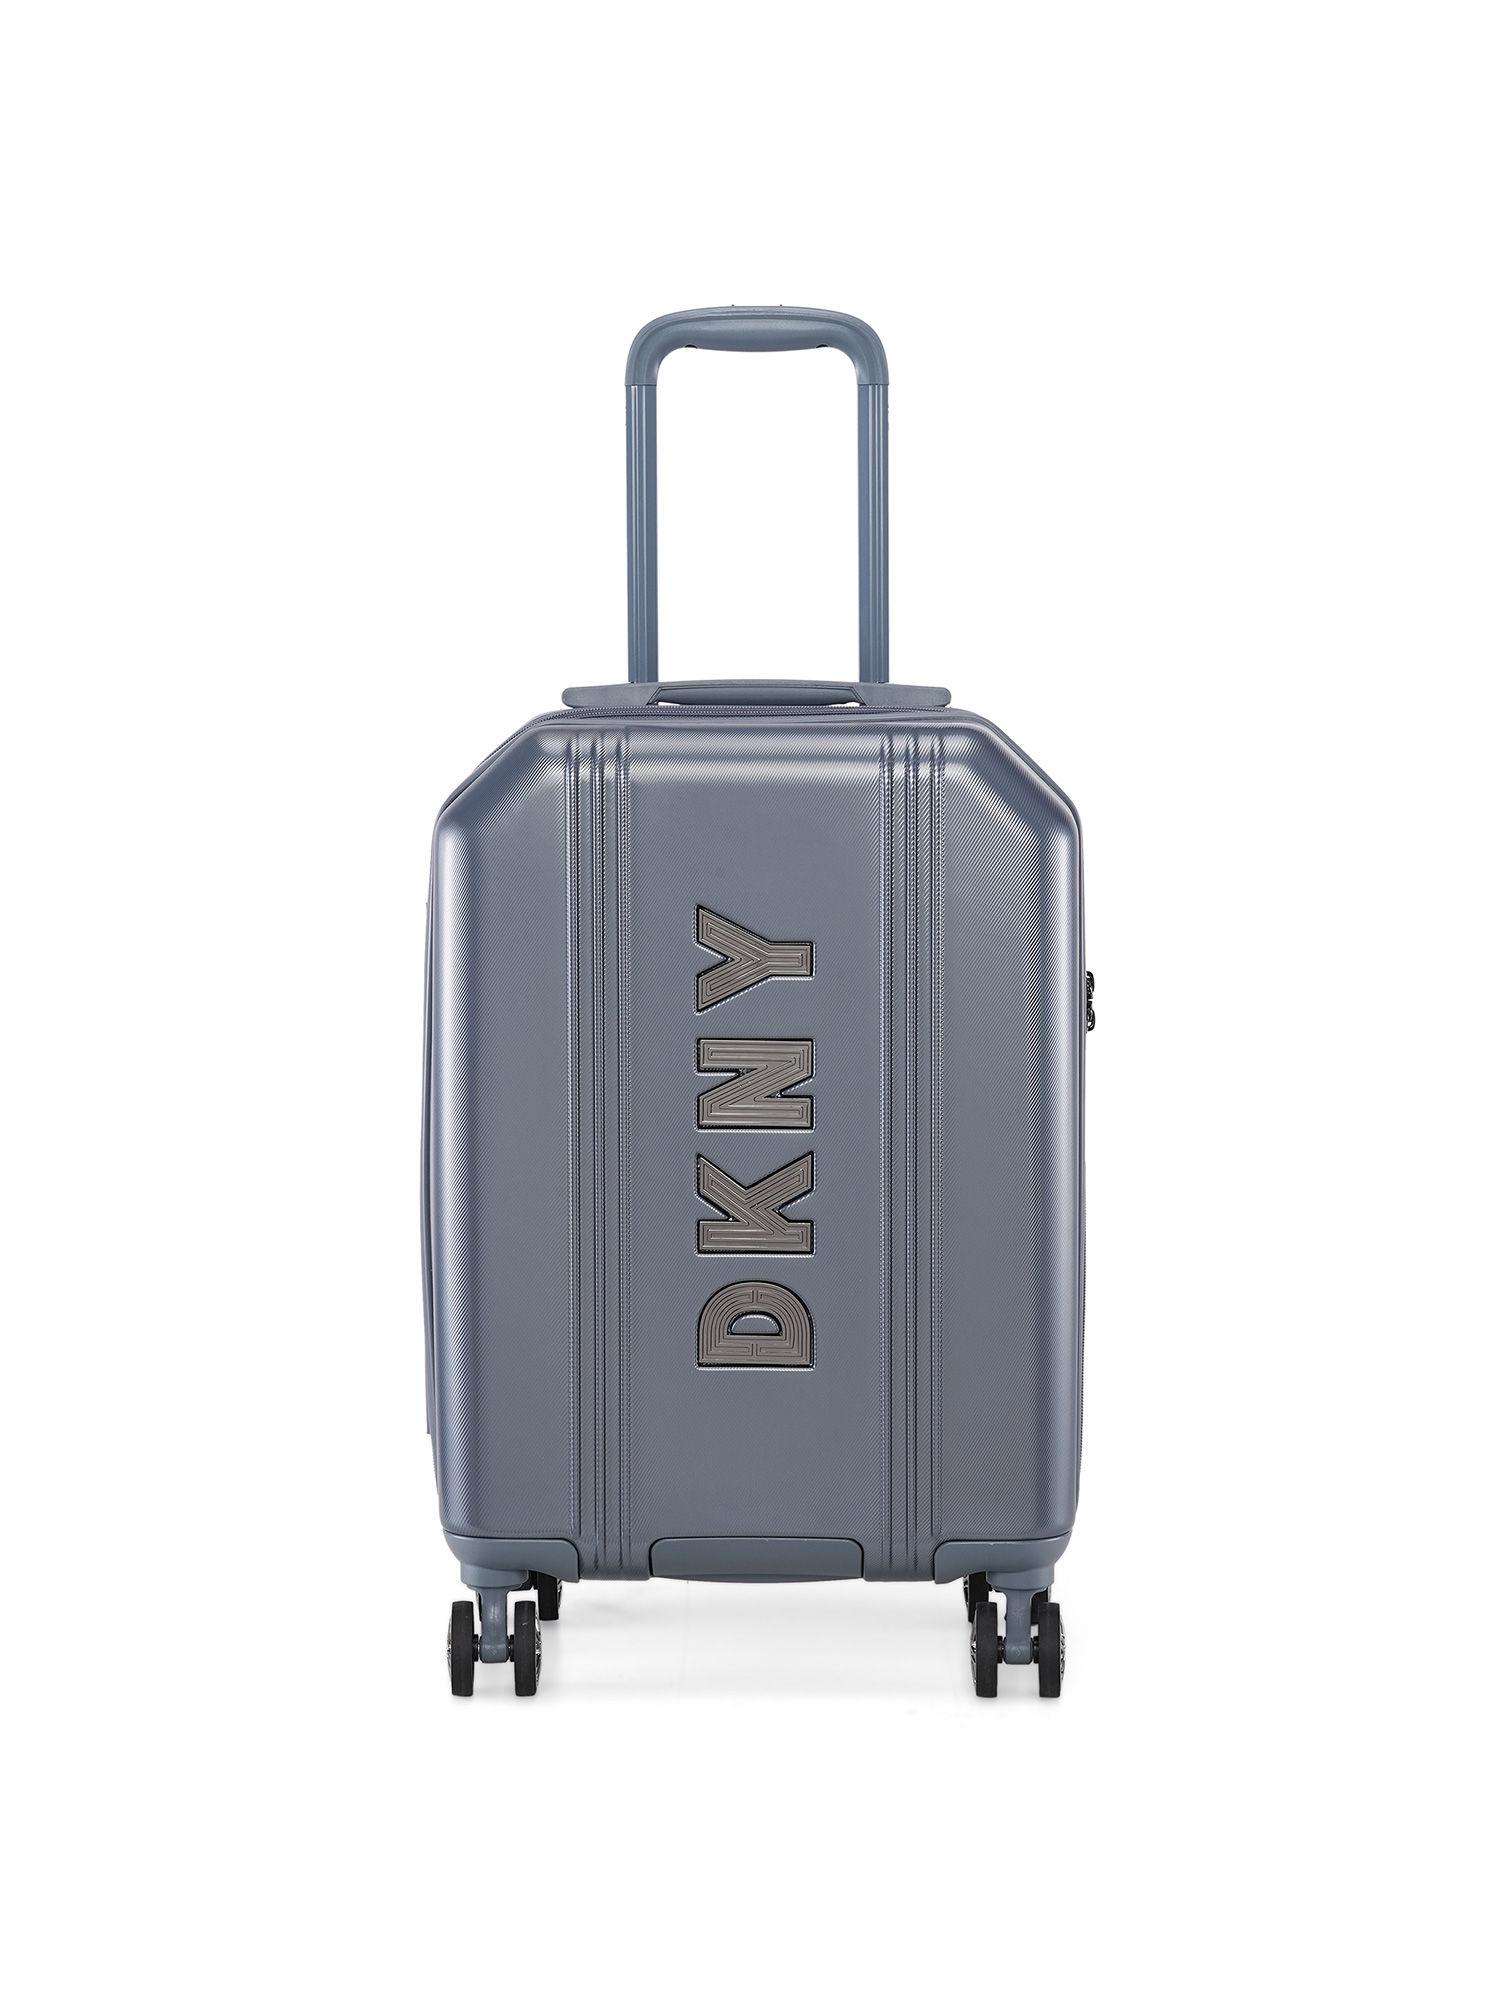 Show Stopper Blue Suede Color Abs Hard Cabin Trolley